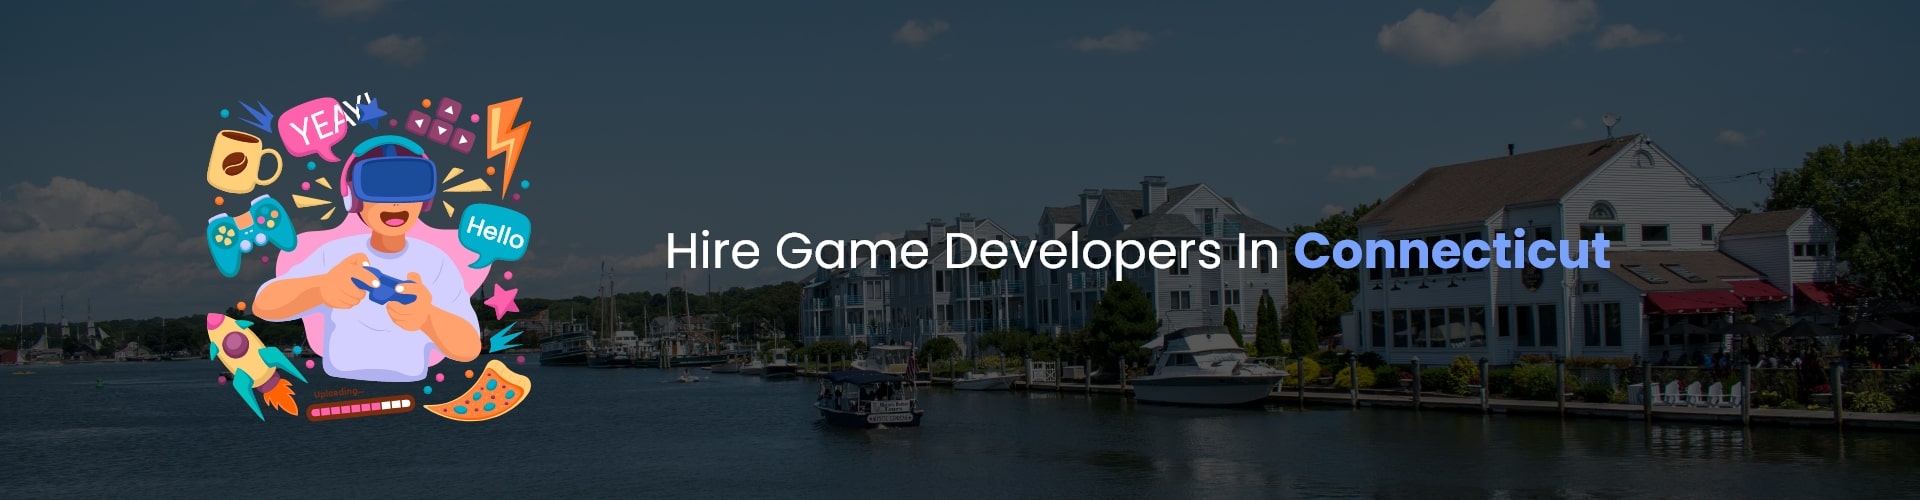 hire game developers in connecticut